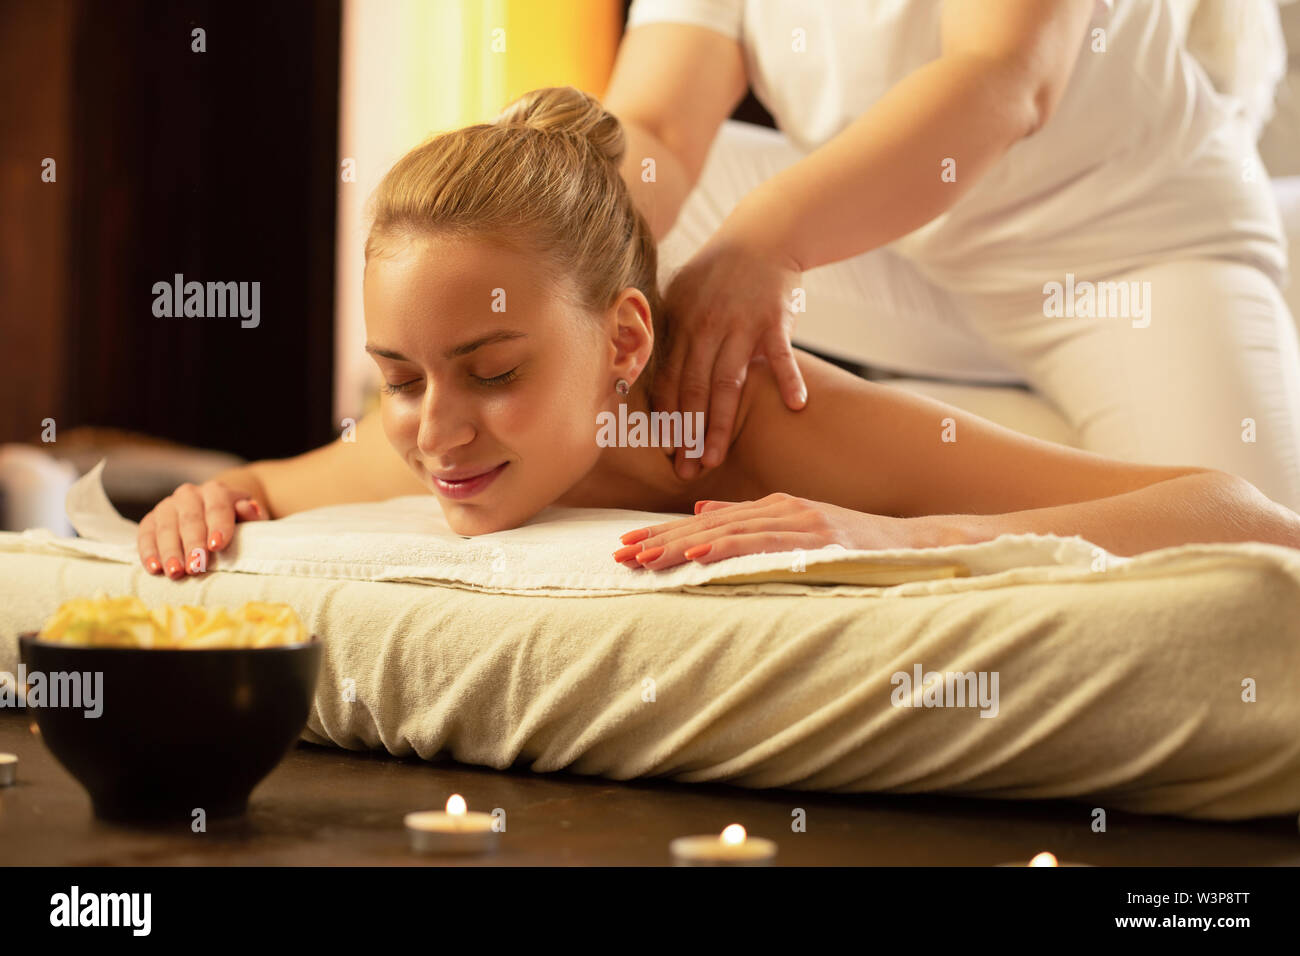 Massage session. Smiling blonde woman with tied hair being satisfied with  skills of massage master in salon Stock Photo - Alamy